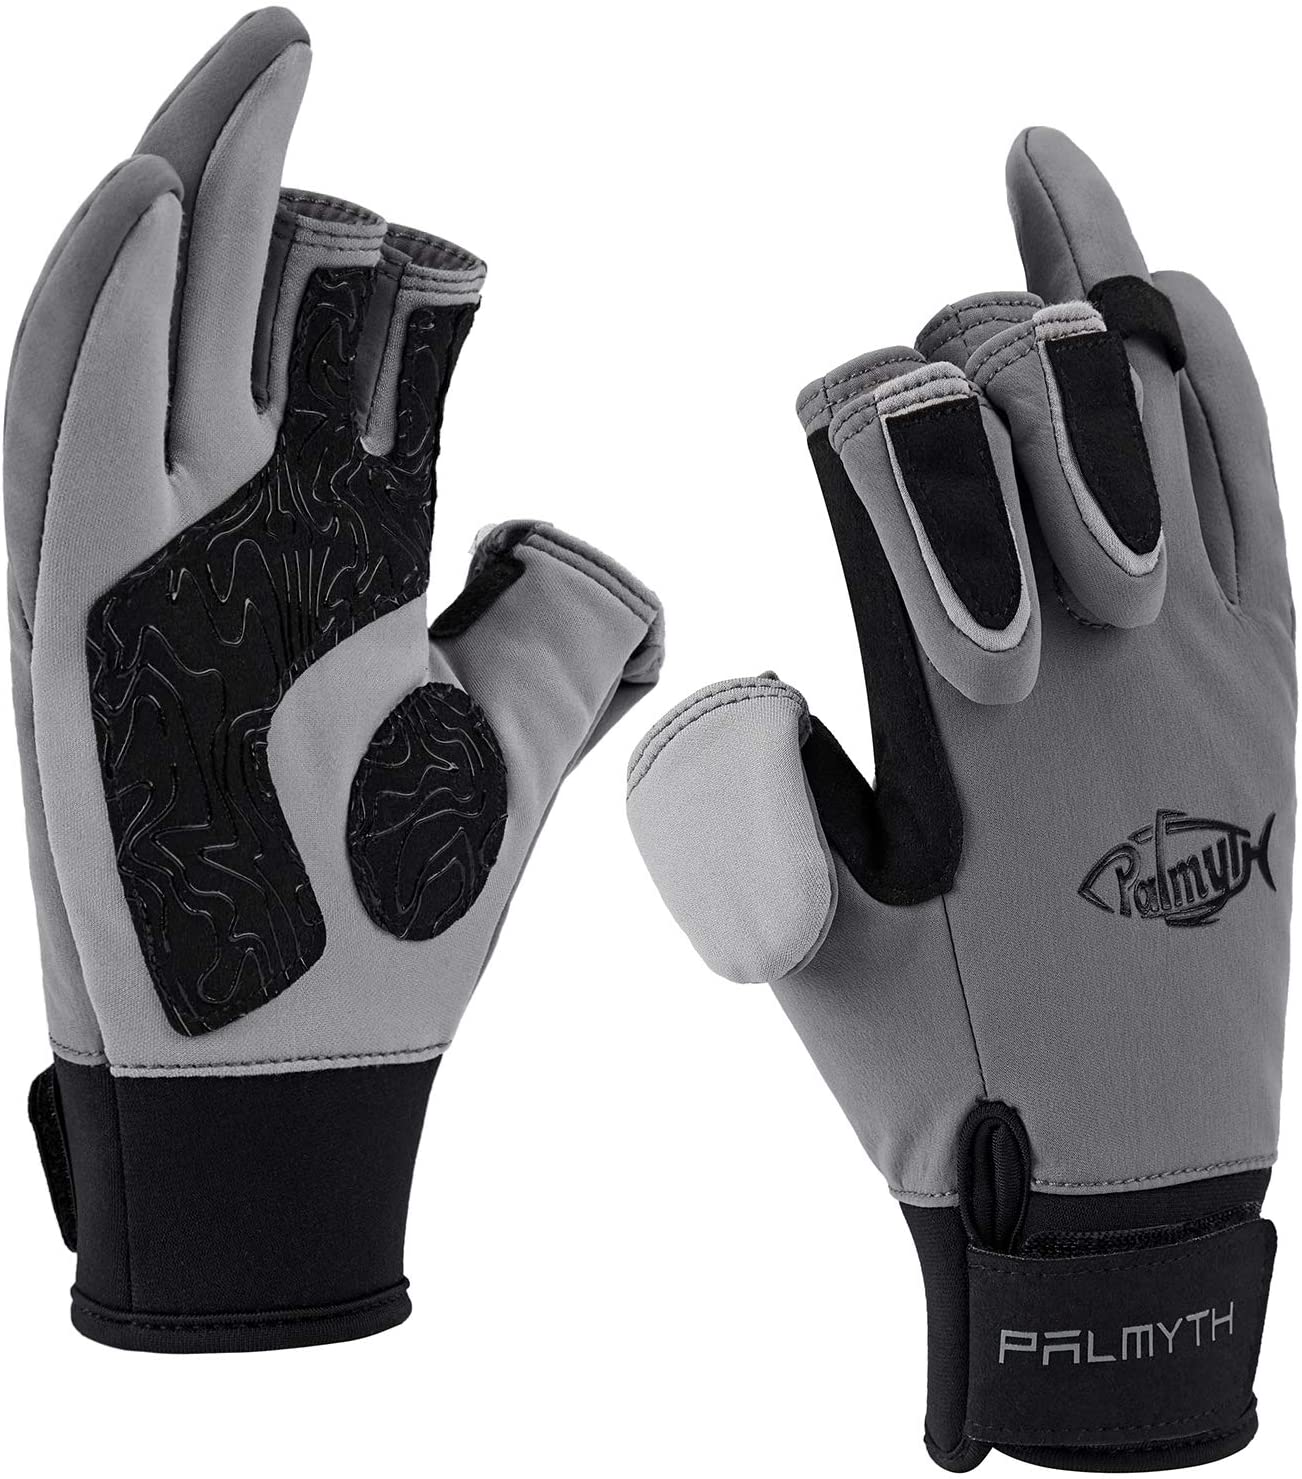 Premium Palmyth Gloves You Must Have in 2022!